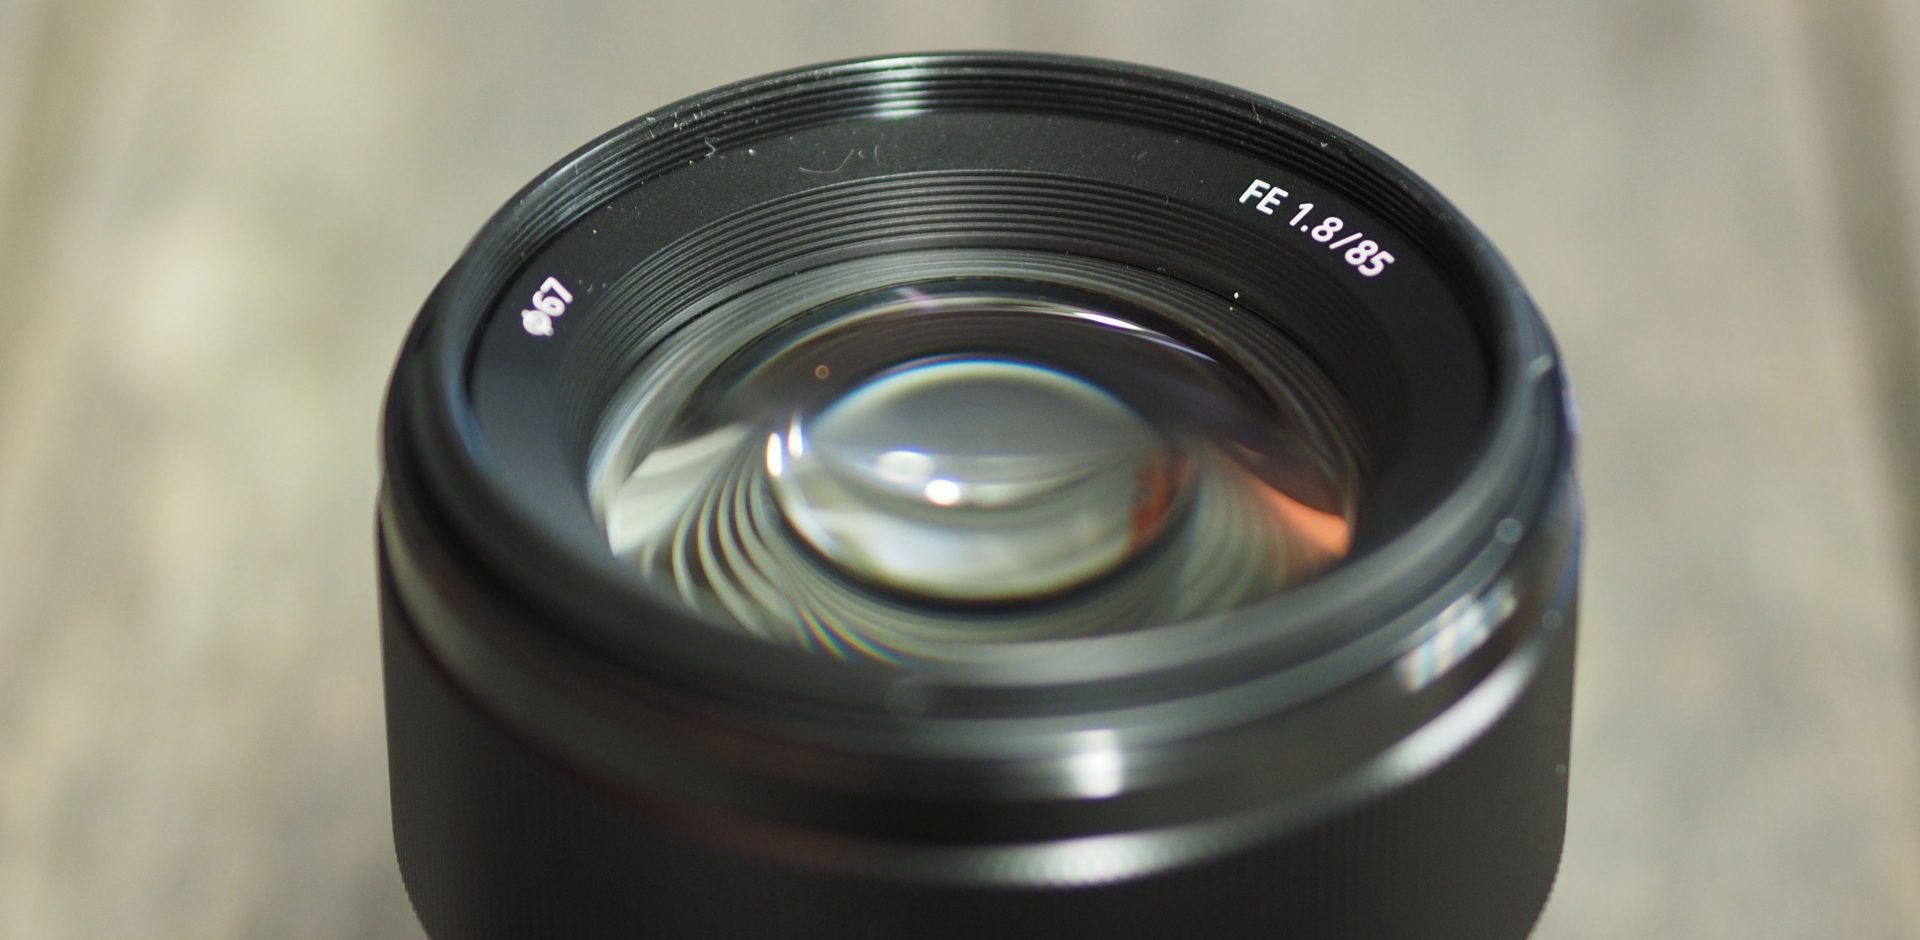 Sony FE 85mm f1.8 review | Cameralabs